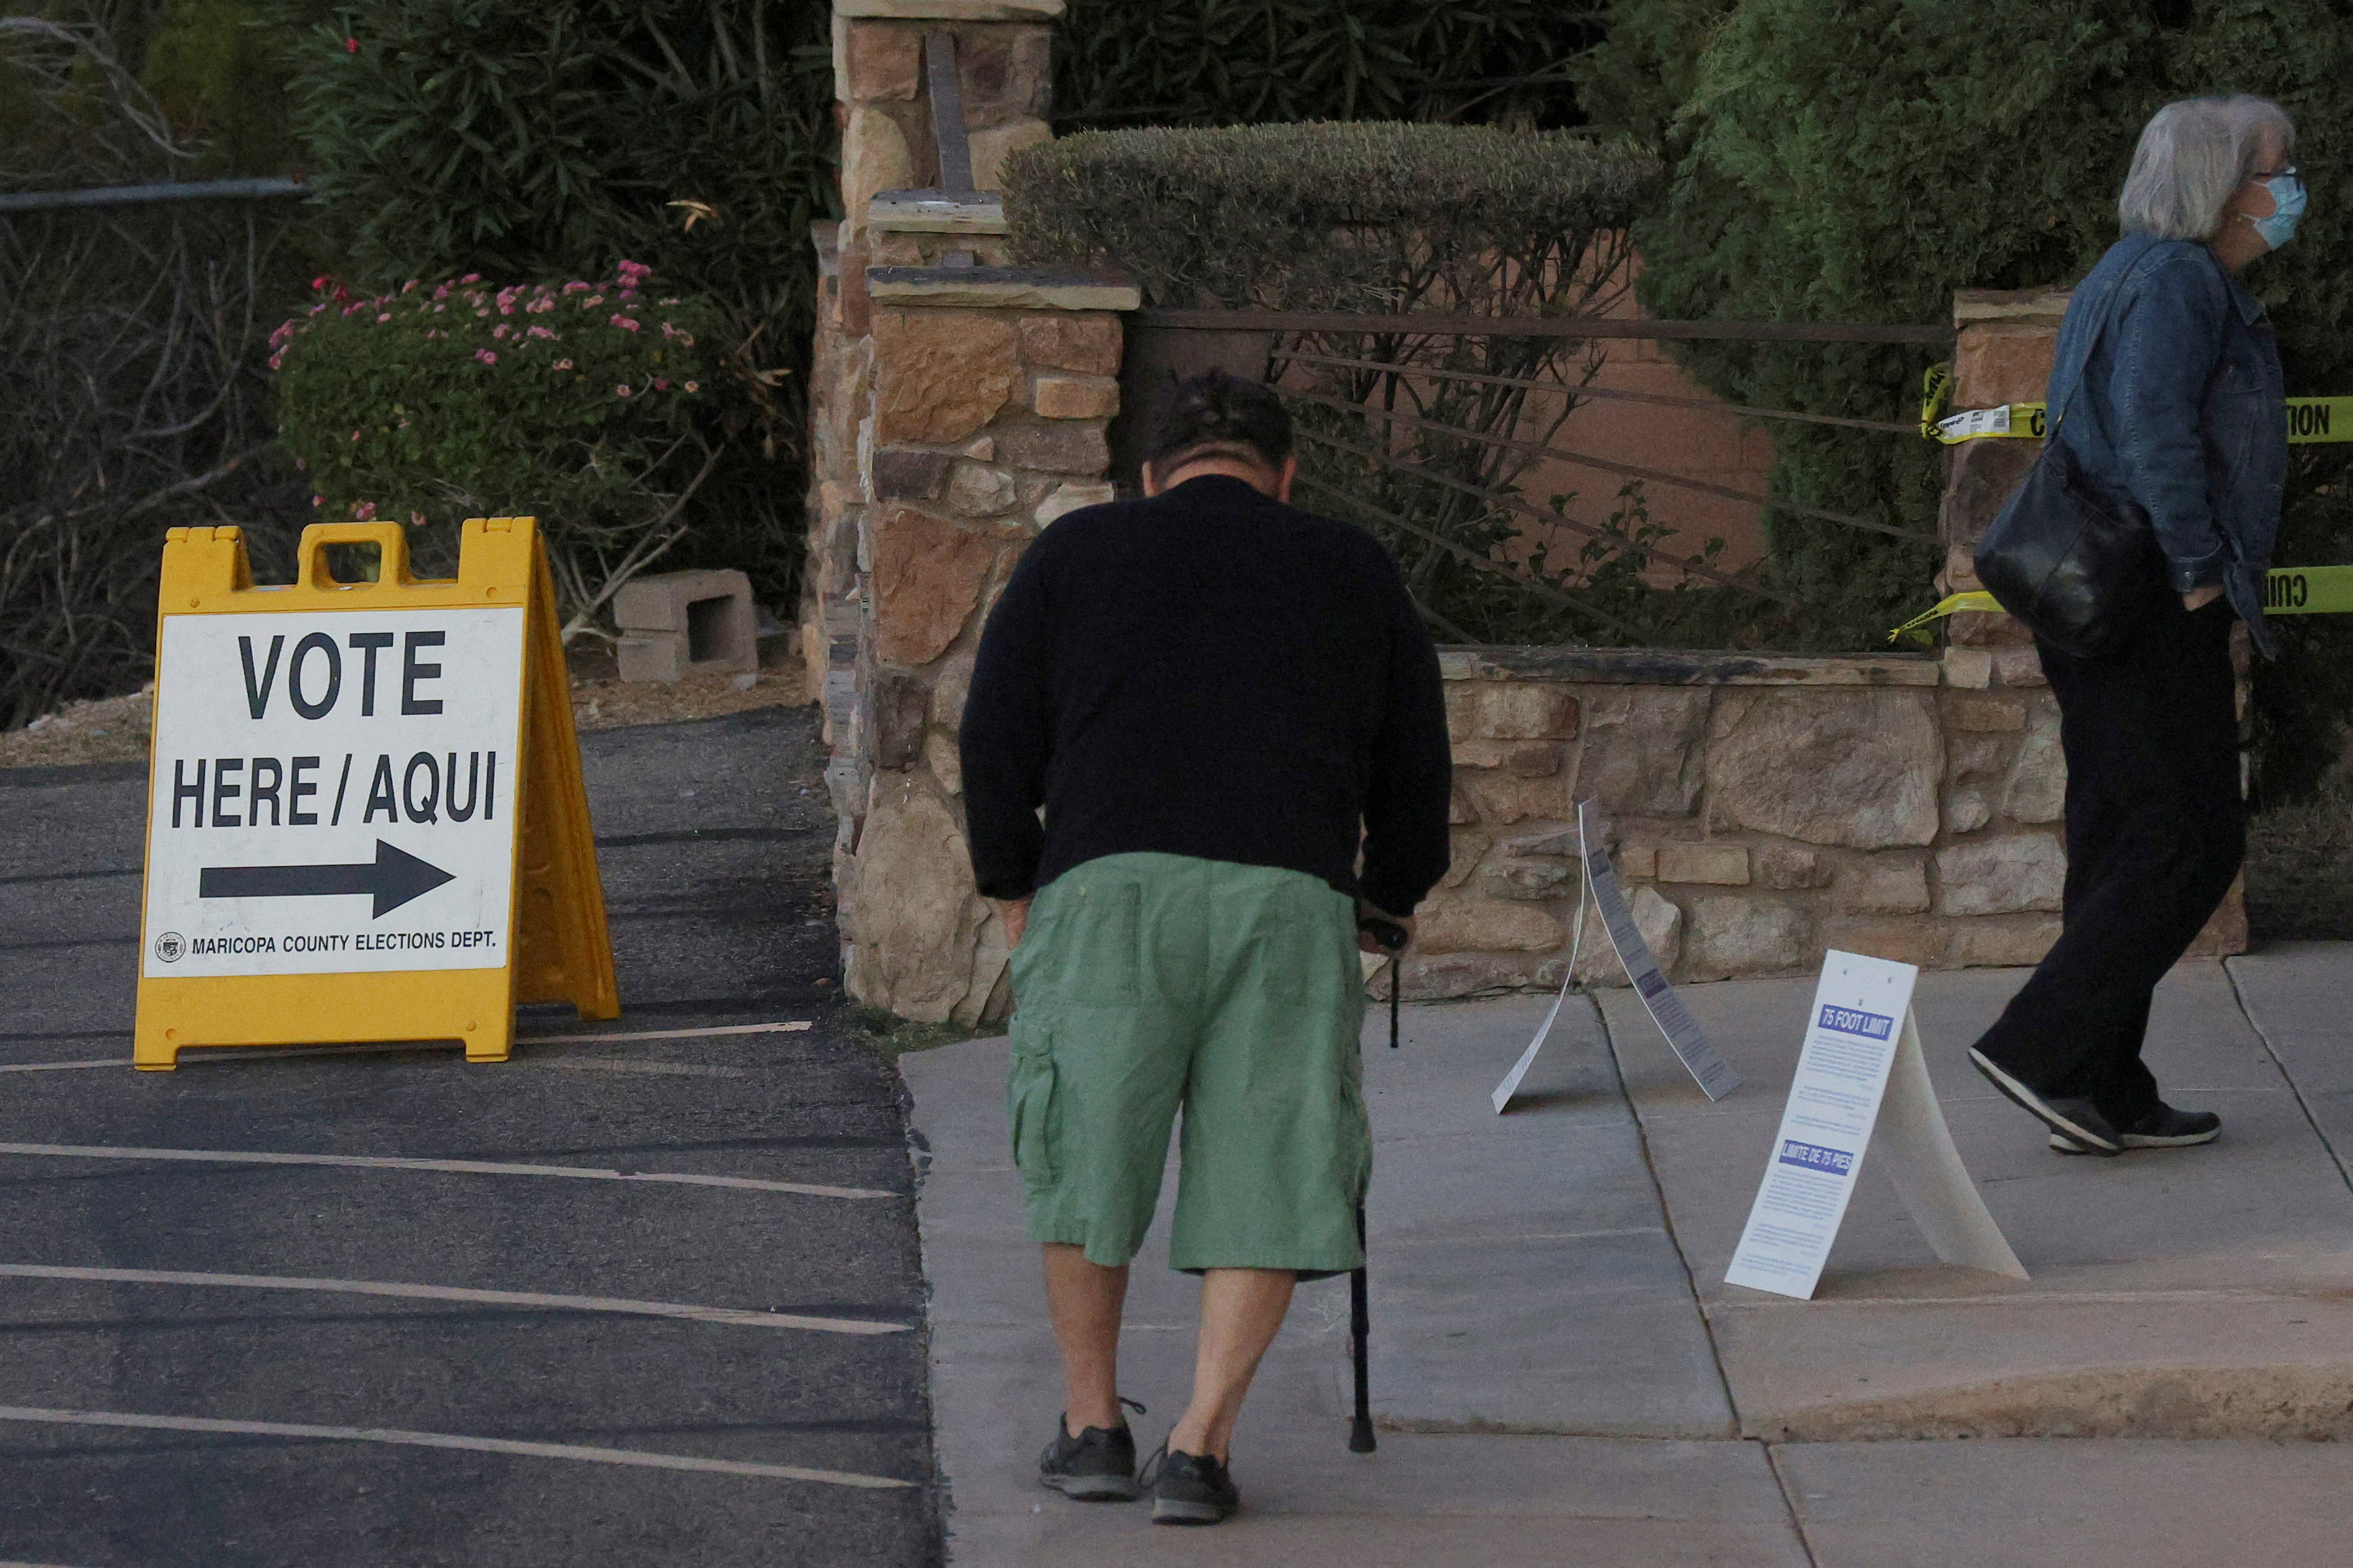 Voters arrive to cast their ballots in the midterm elections in Phoenix